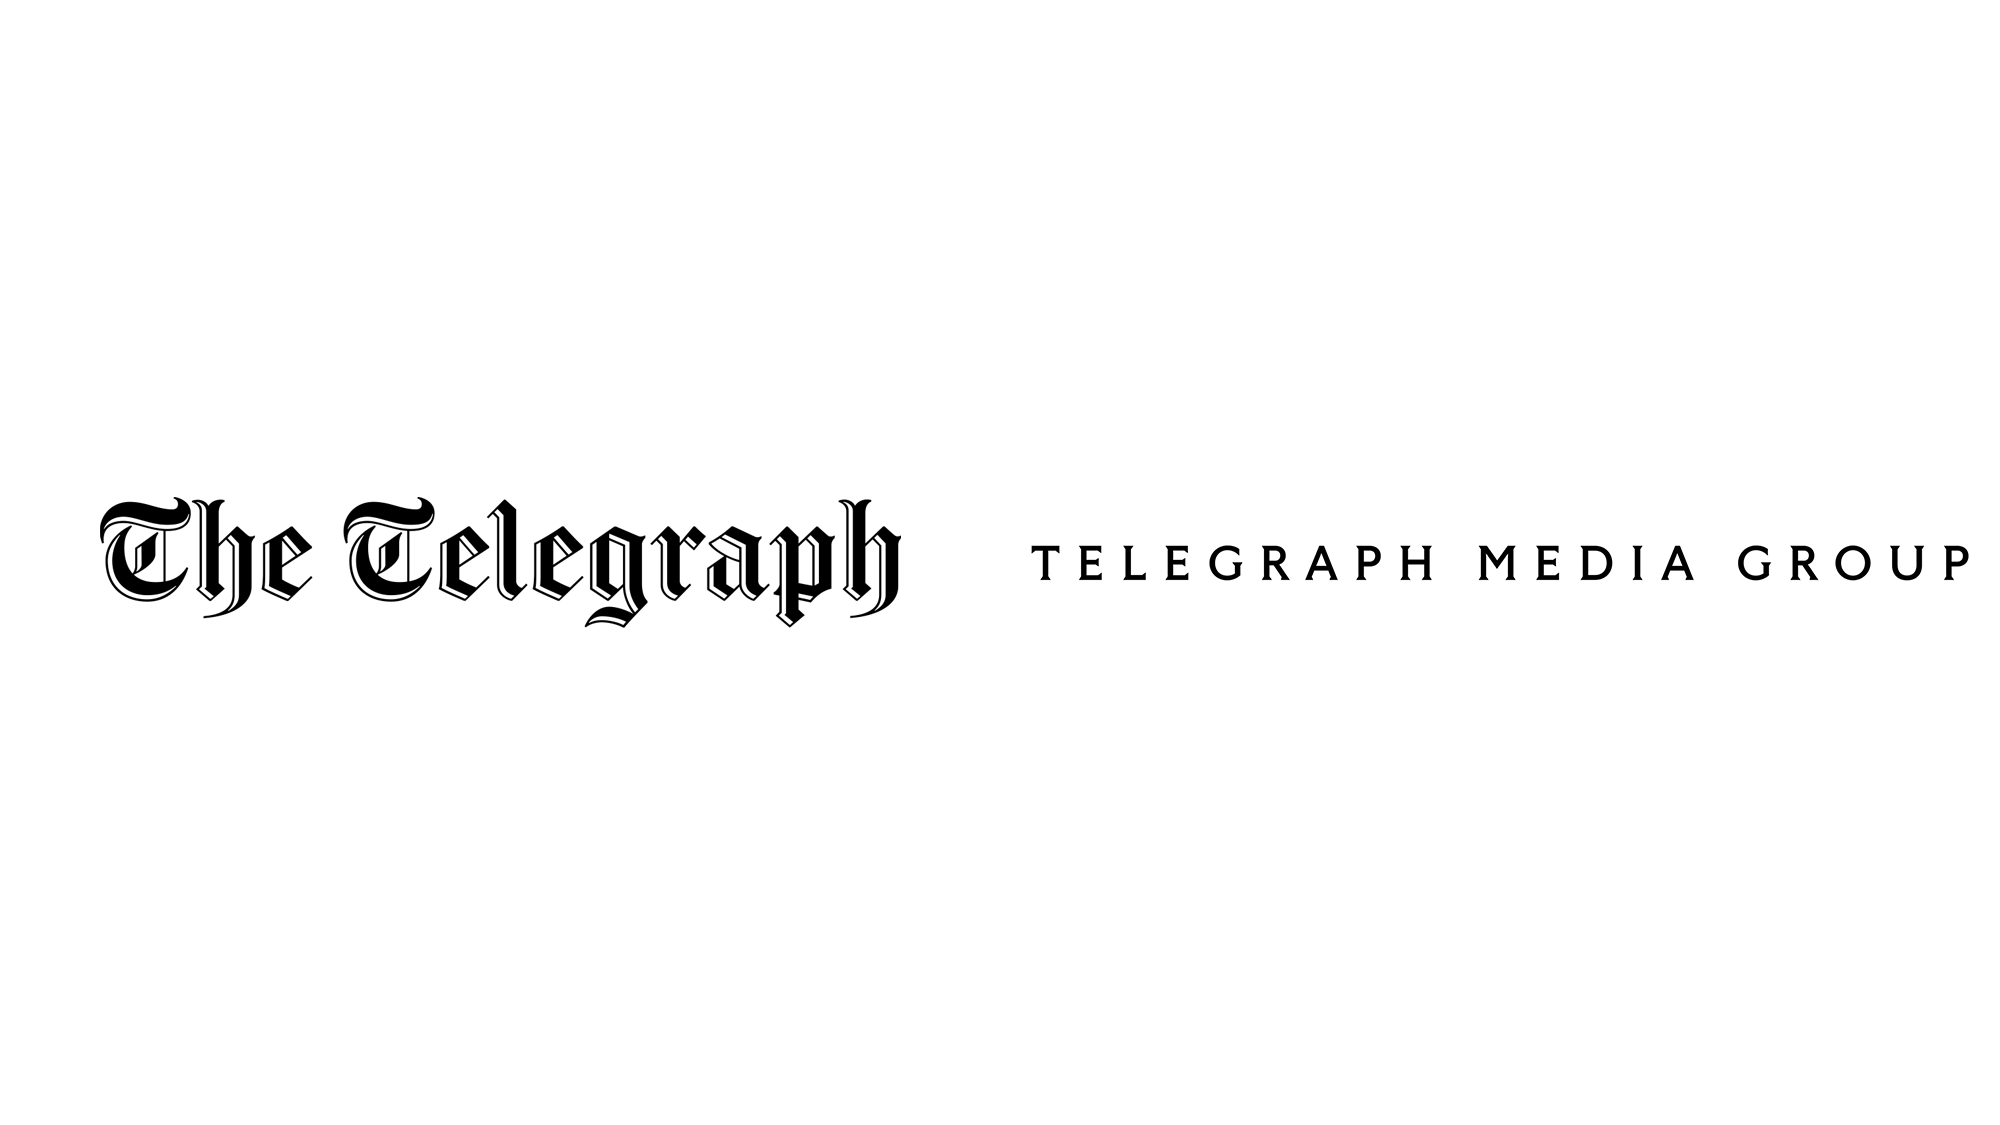 Brand New New Logo For Telegraph Media Group Done In House With Commercial Type